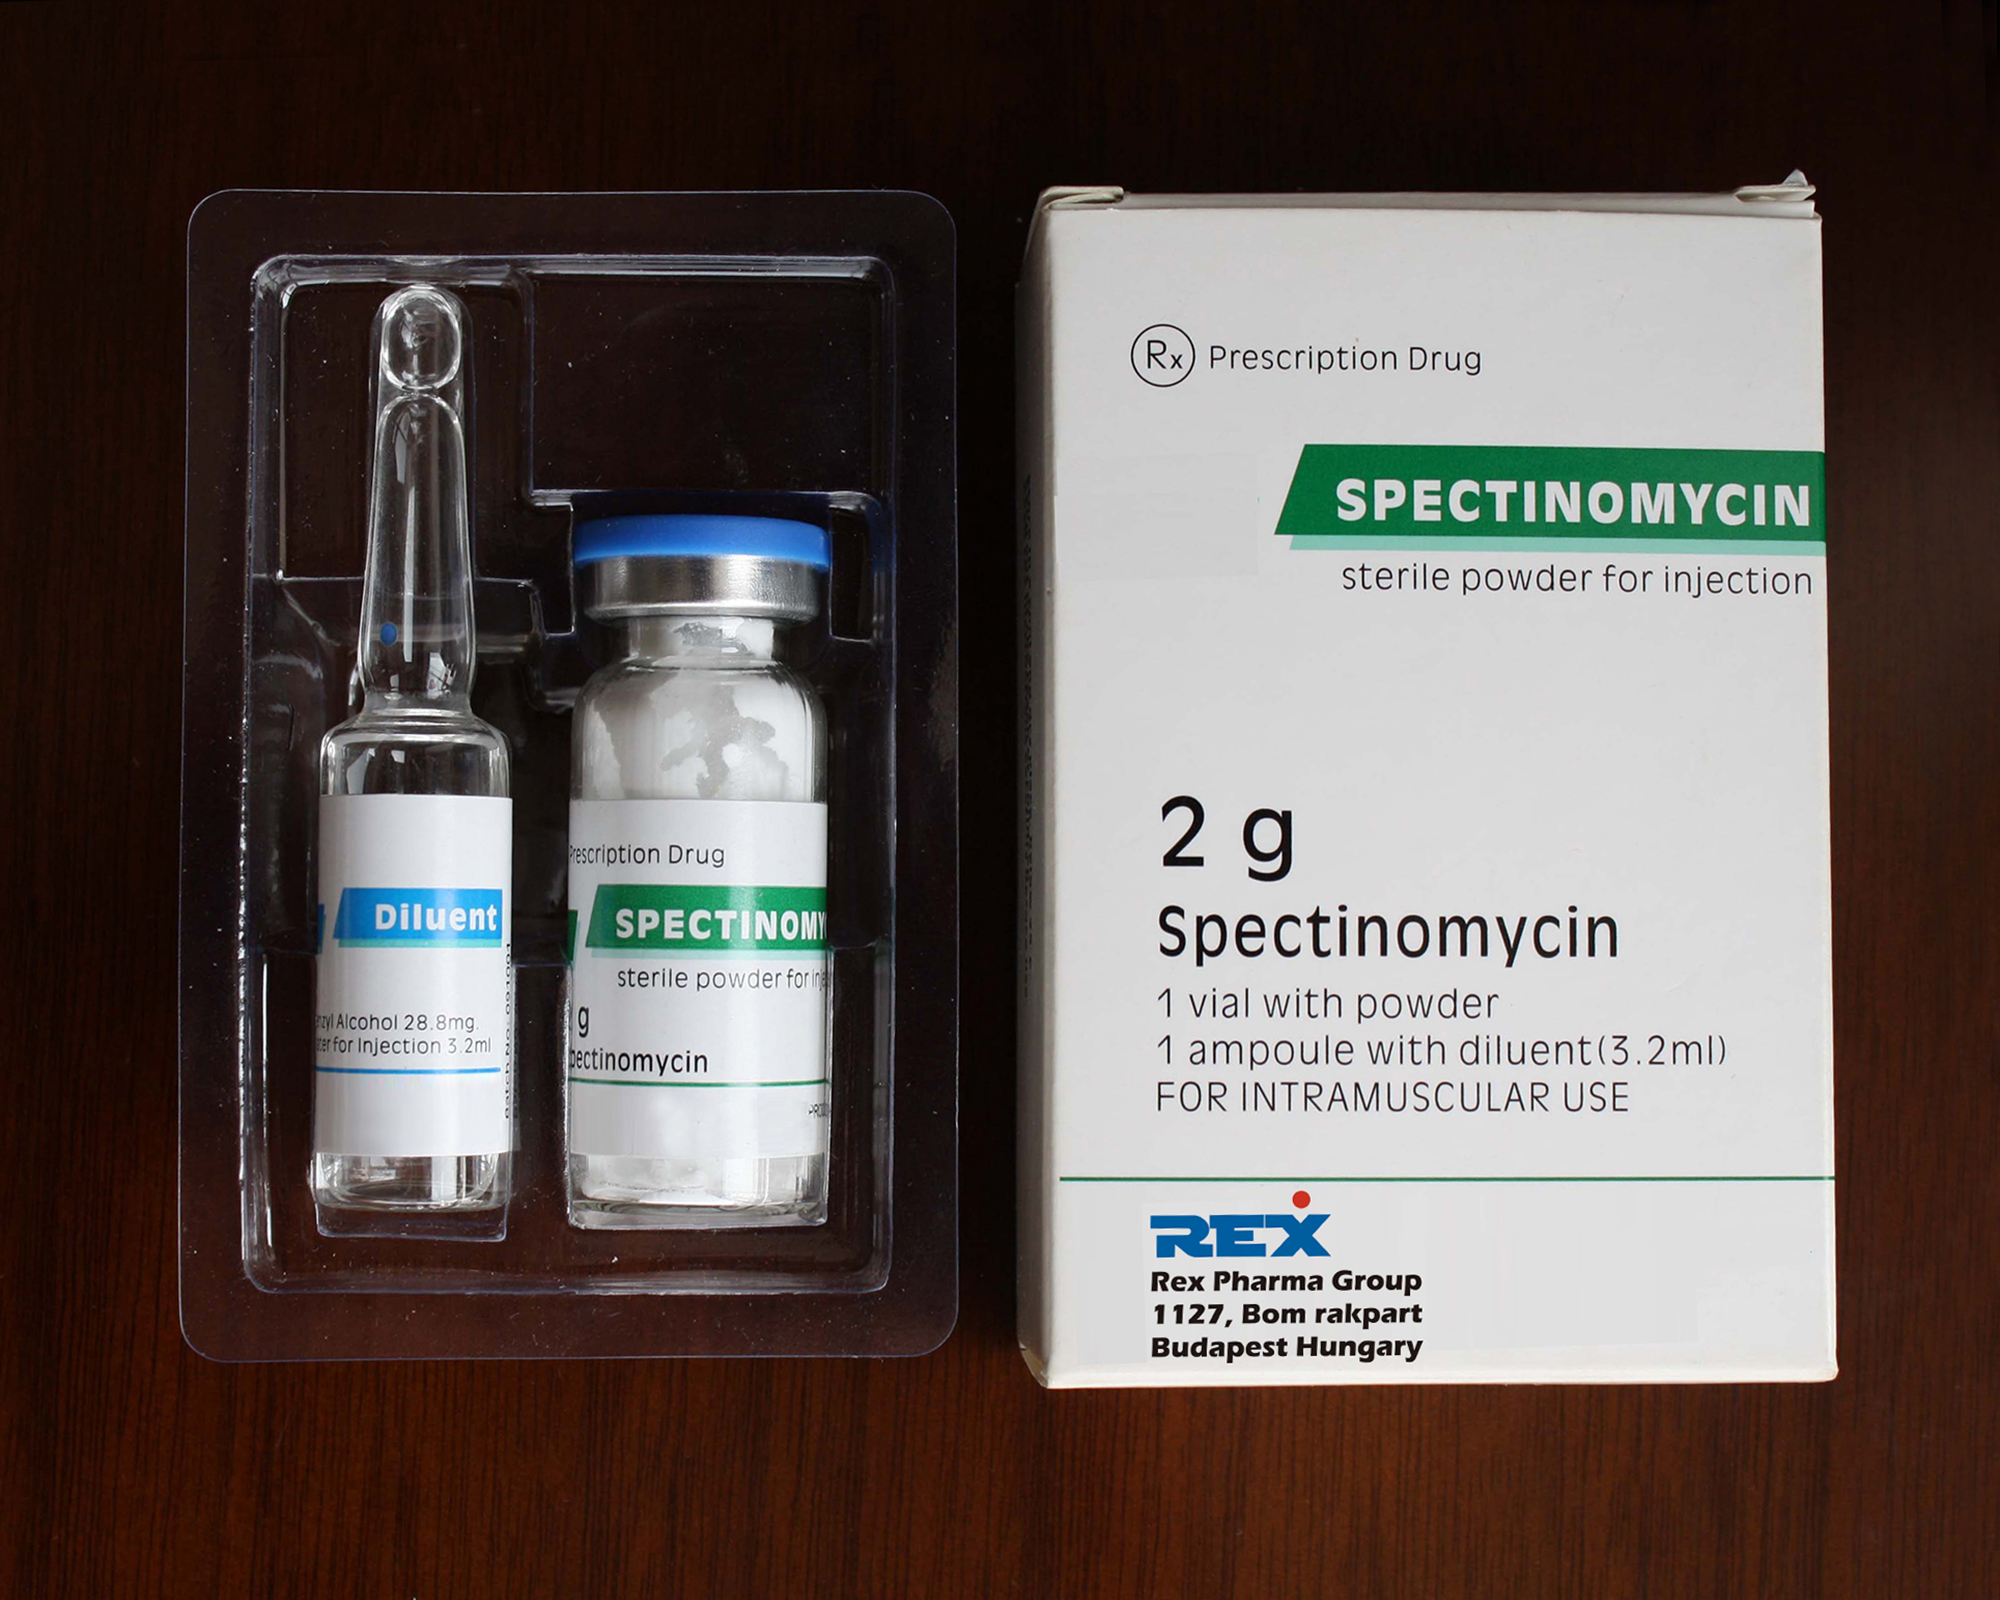 spectionmycin for injection